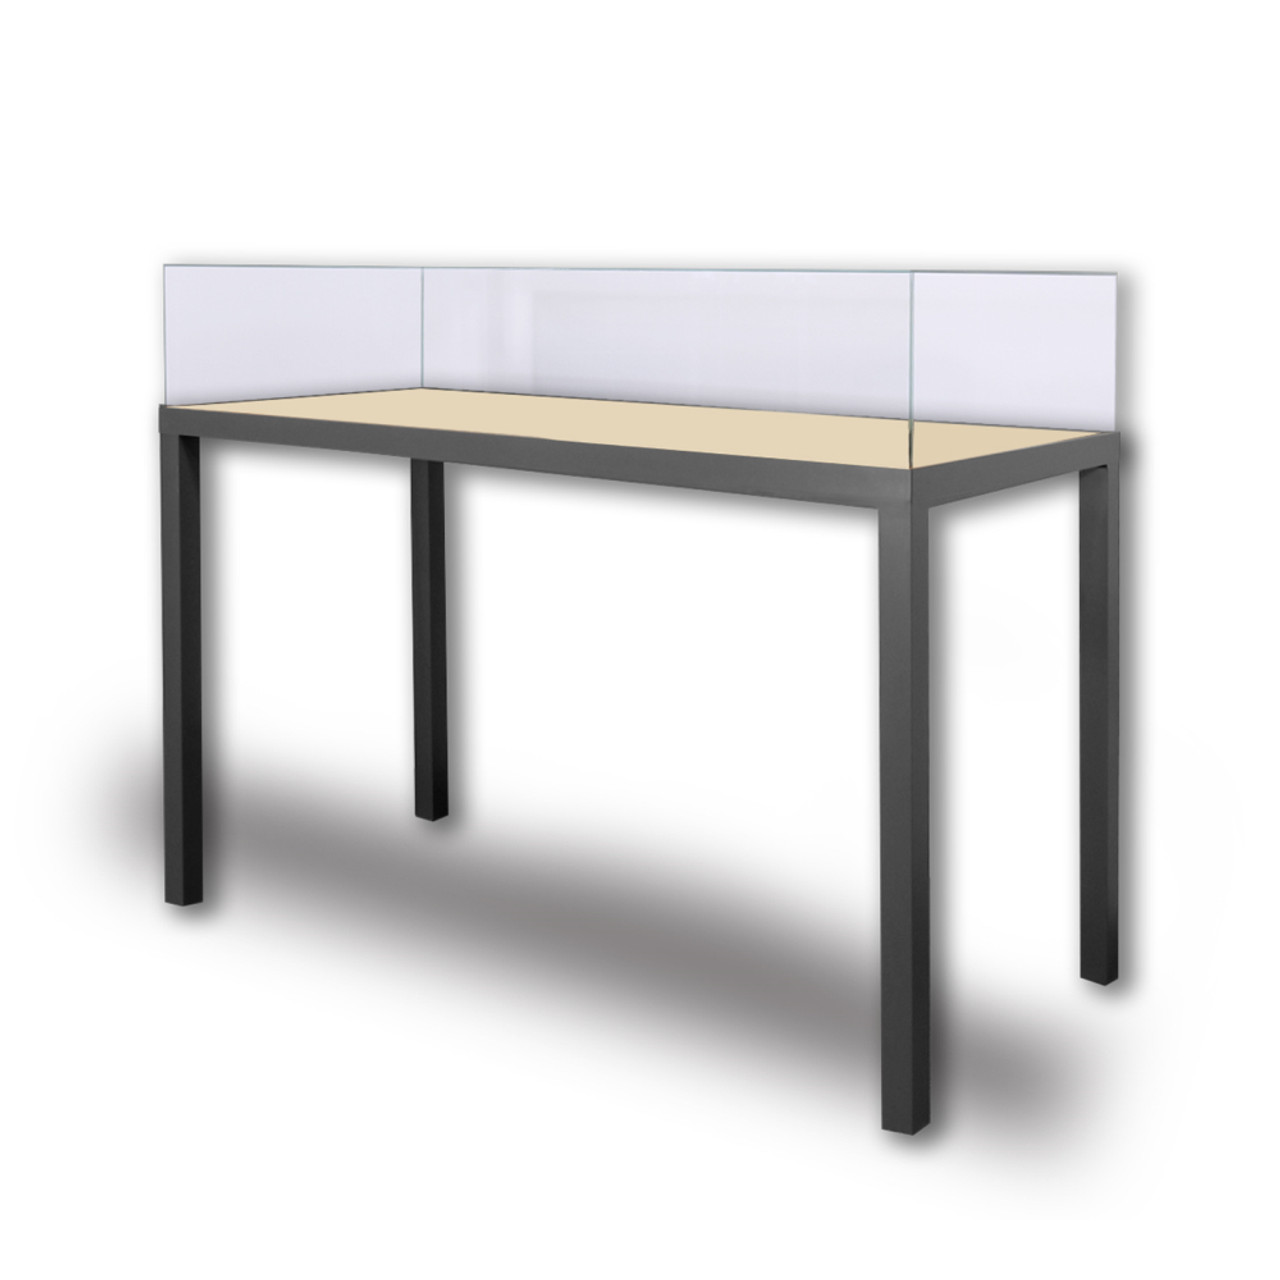 Painted Panel Leg Lift-Off Table with Case Vitrine